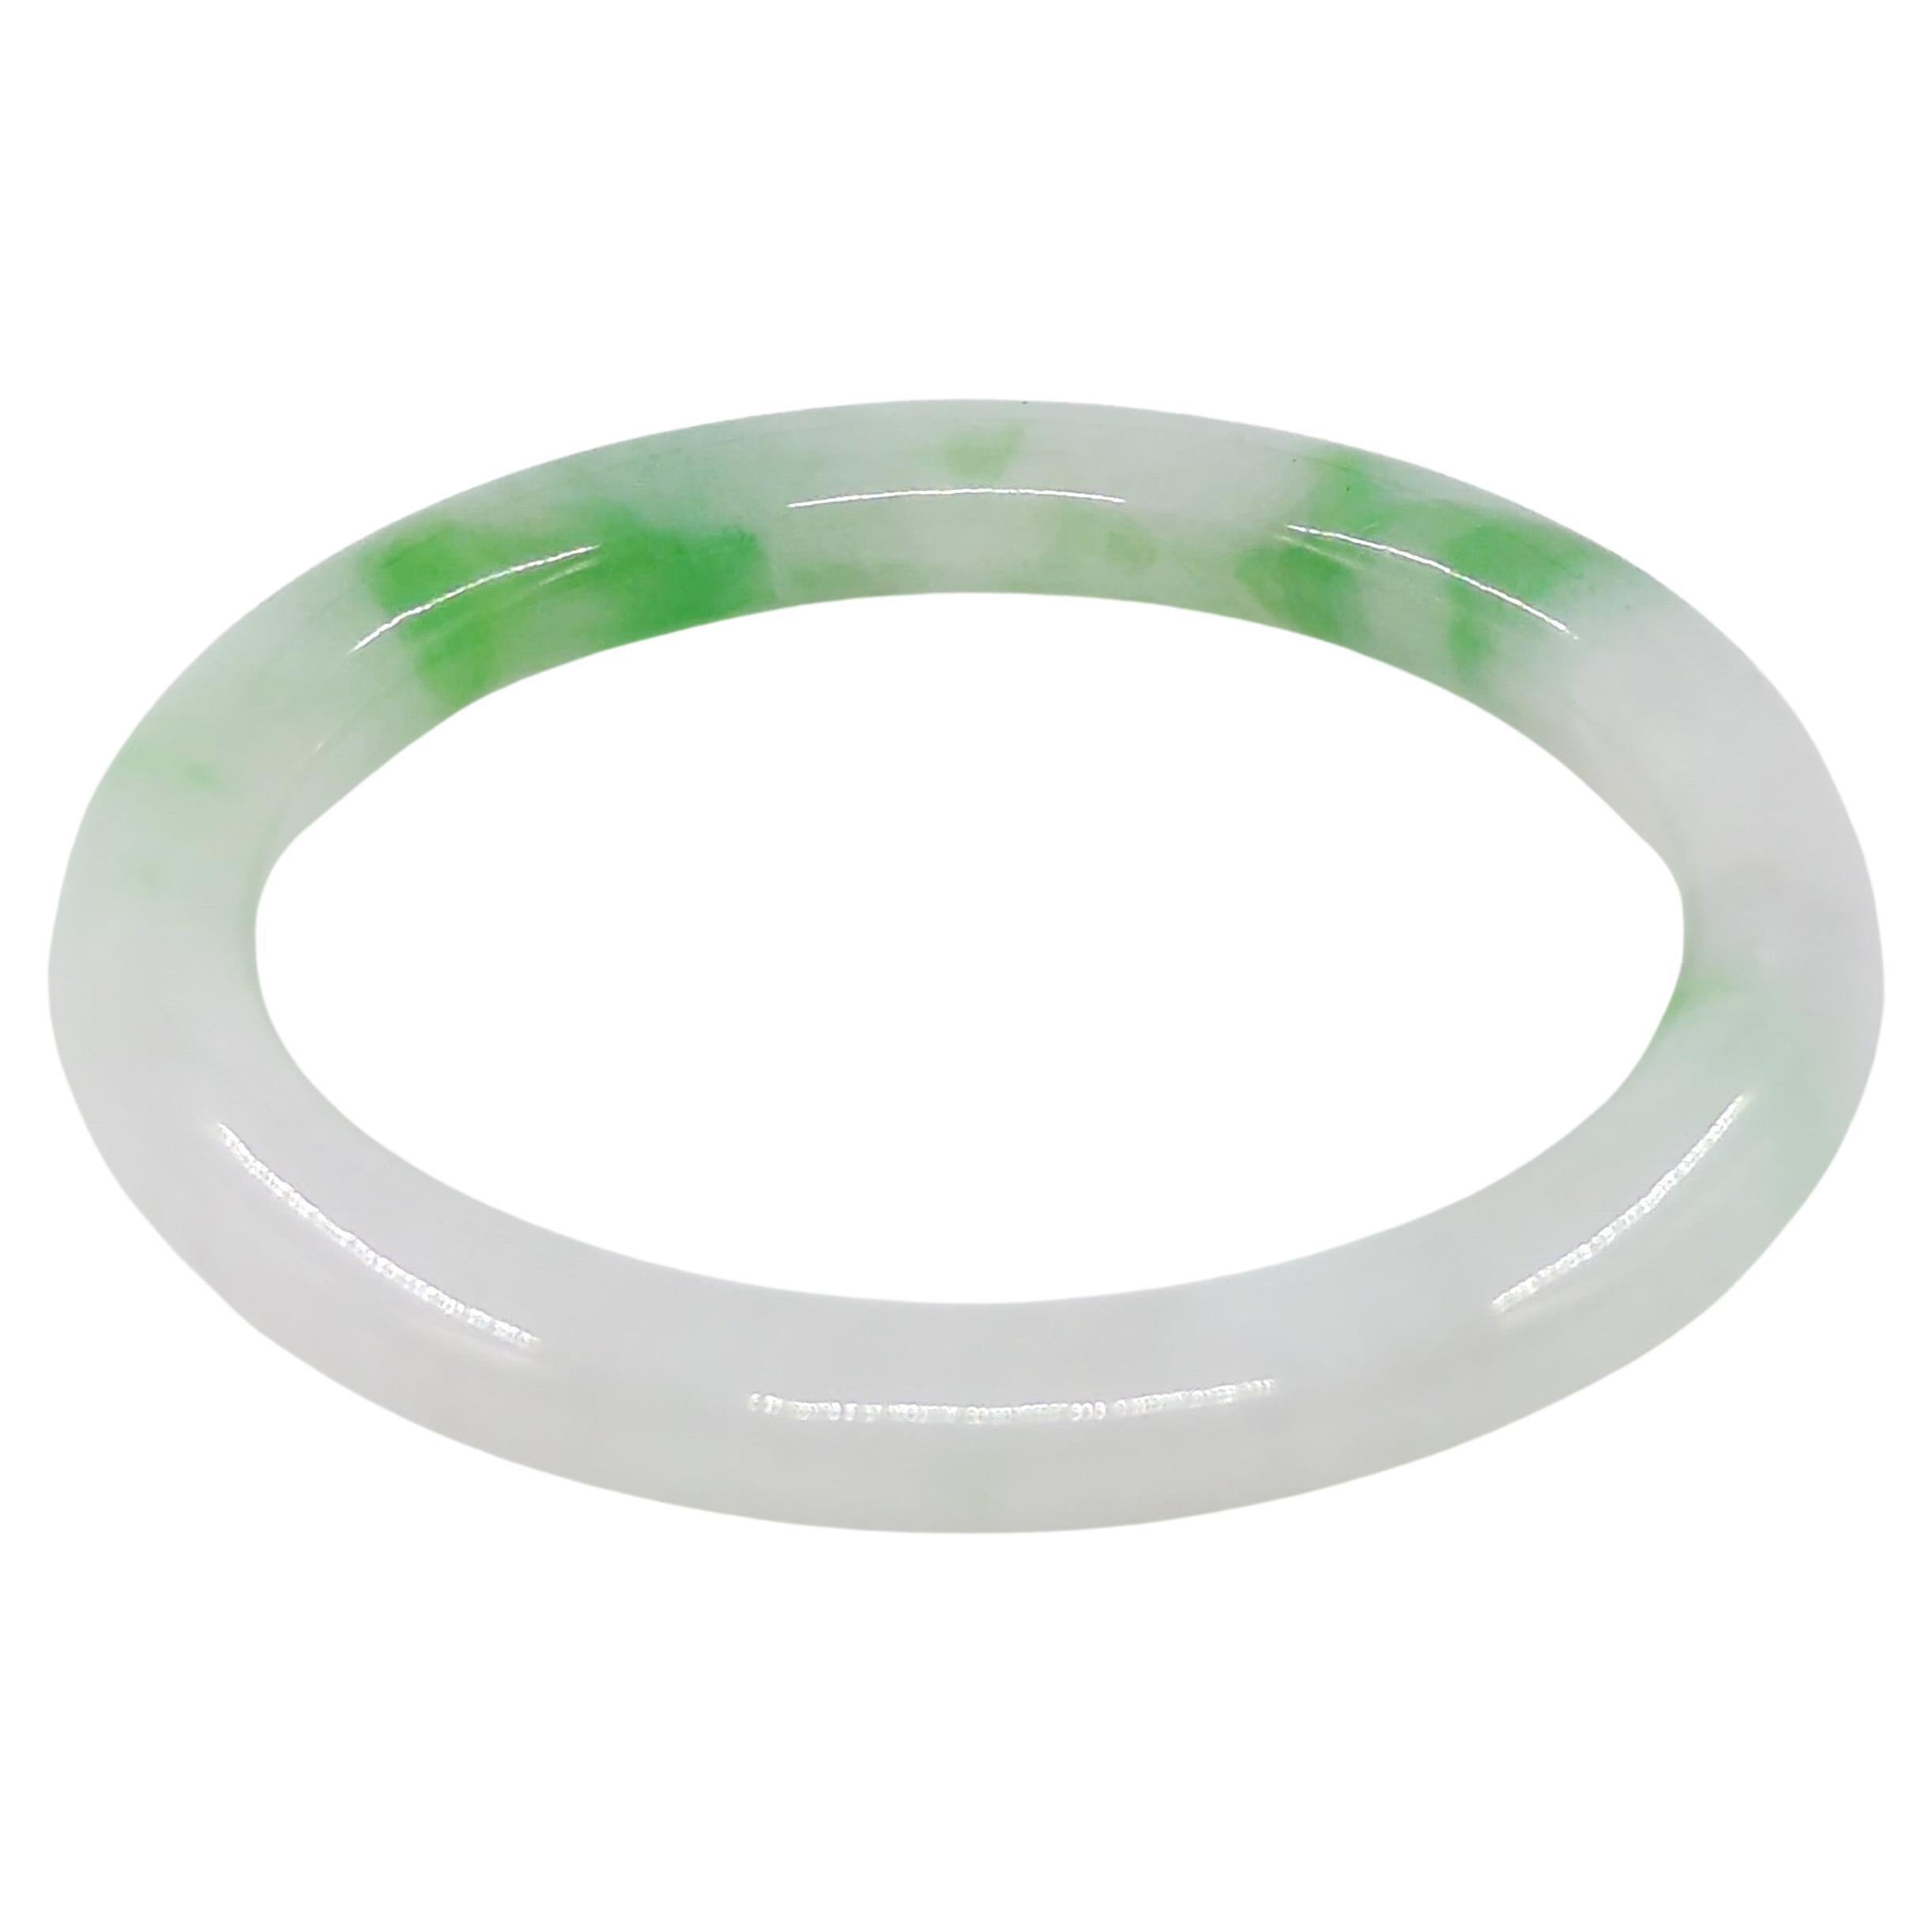 Fine Chinese Carved White Jadeite Bangle Apple Green Inclusions Small 53.5mm ID For Sale 6